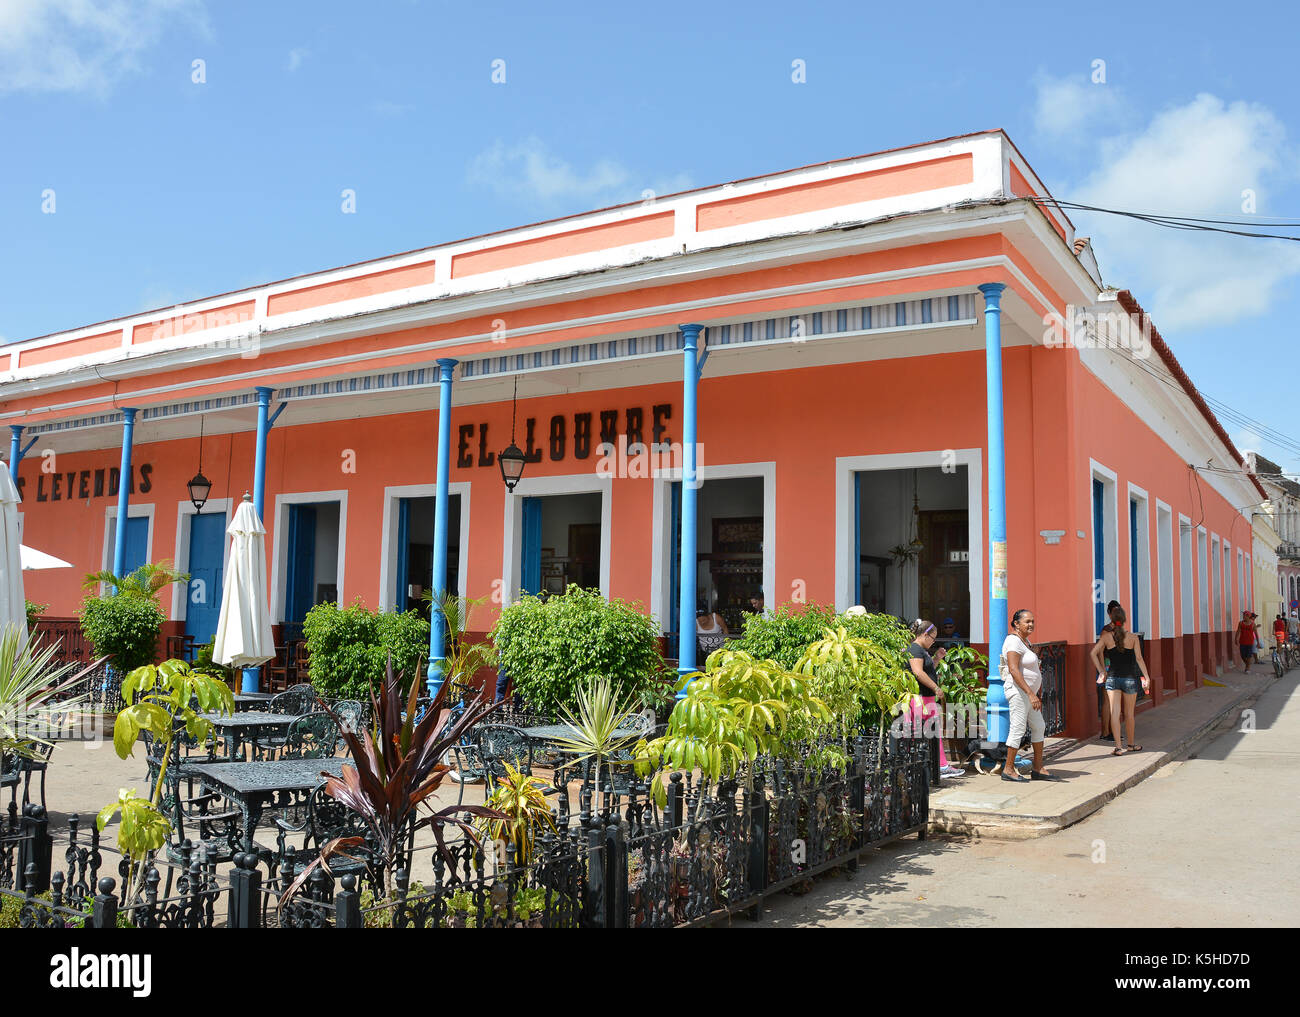 REMEDIOS, CUBA - JULY 27, 2016: El Louvre Bar. Locals claim it is the oldest bar in the country in continuous service, since 1866. Stock Photo